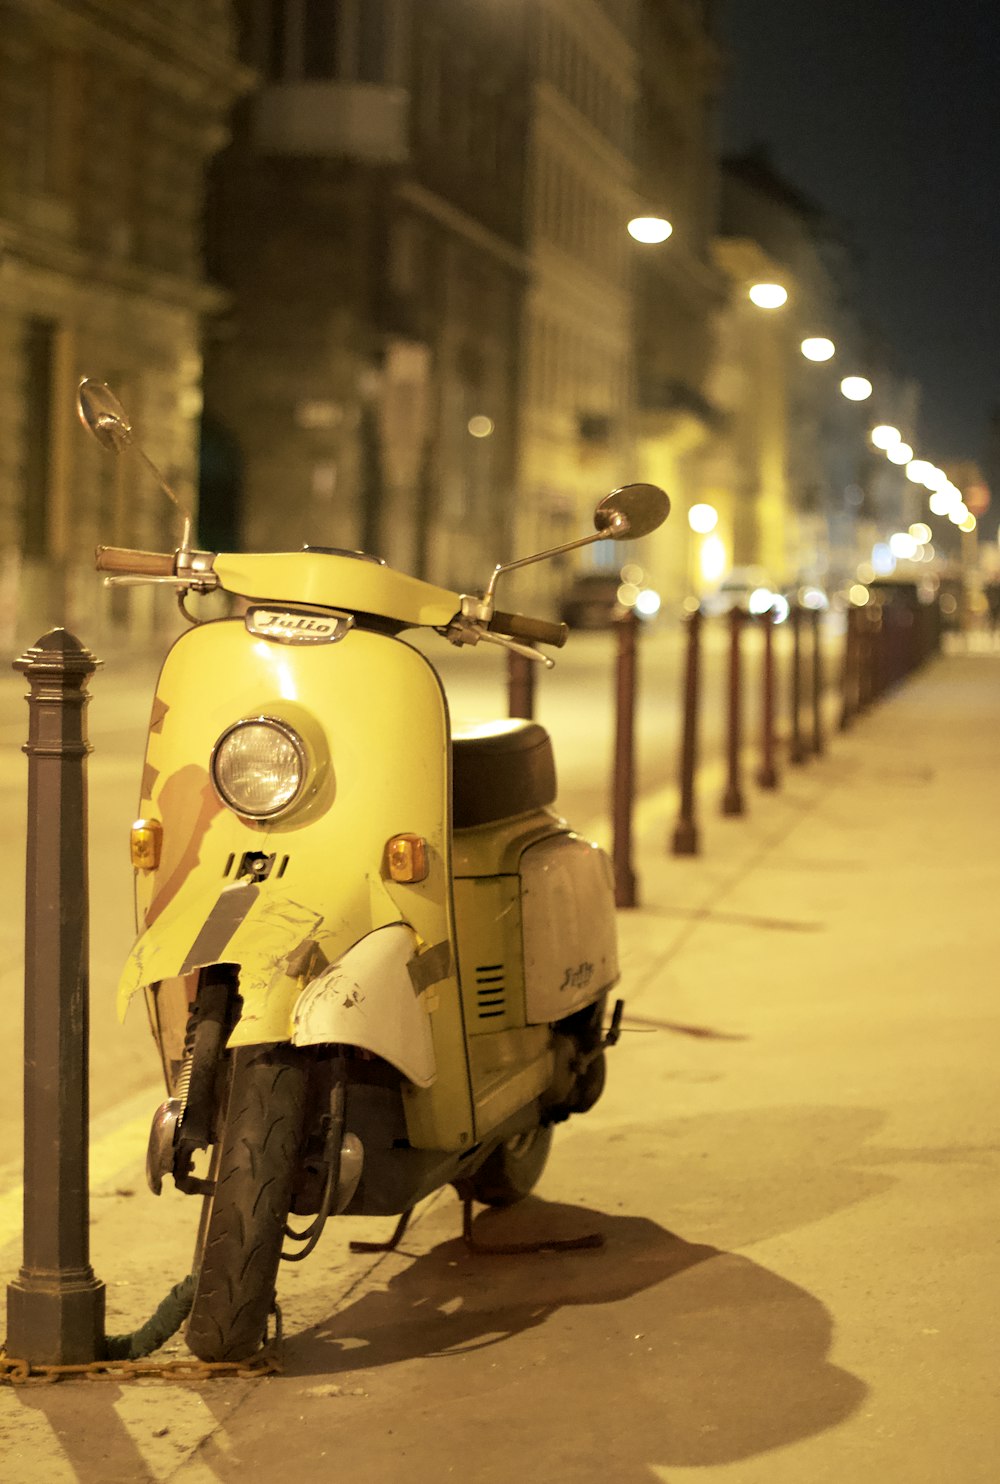 a scooter parked on the side of a street